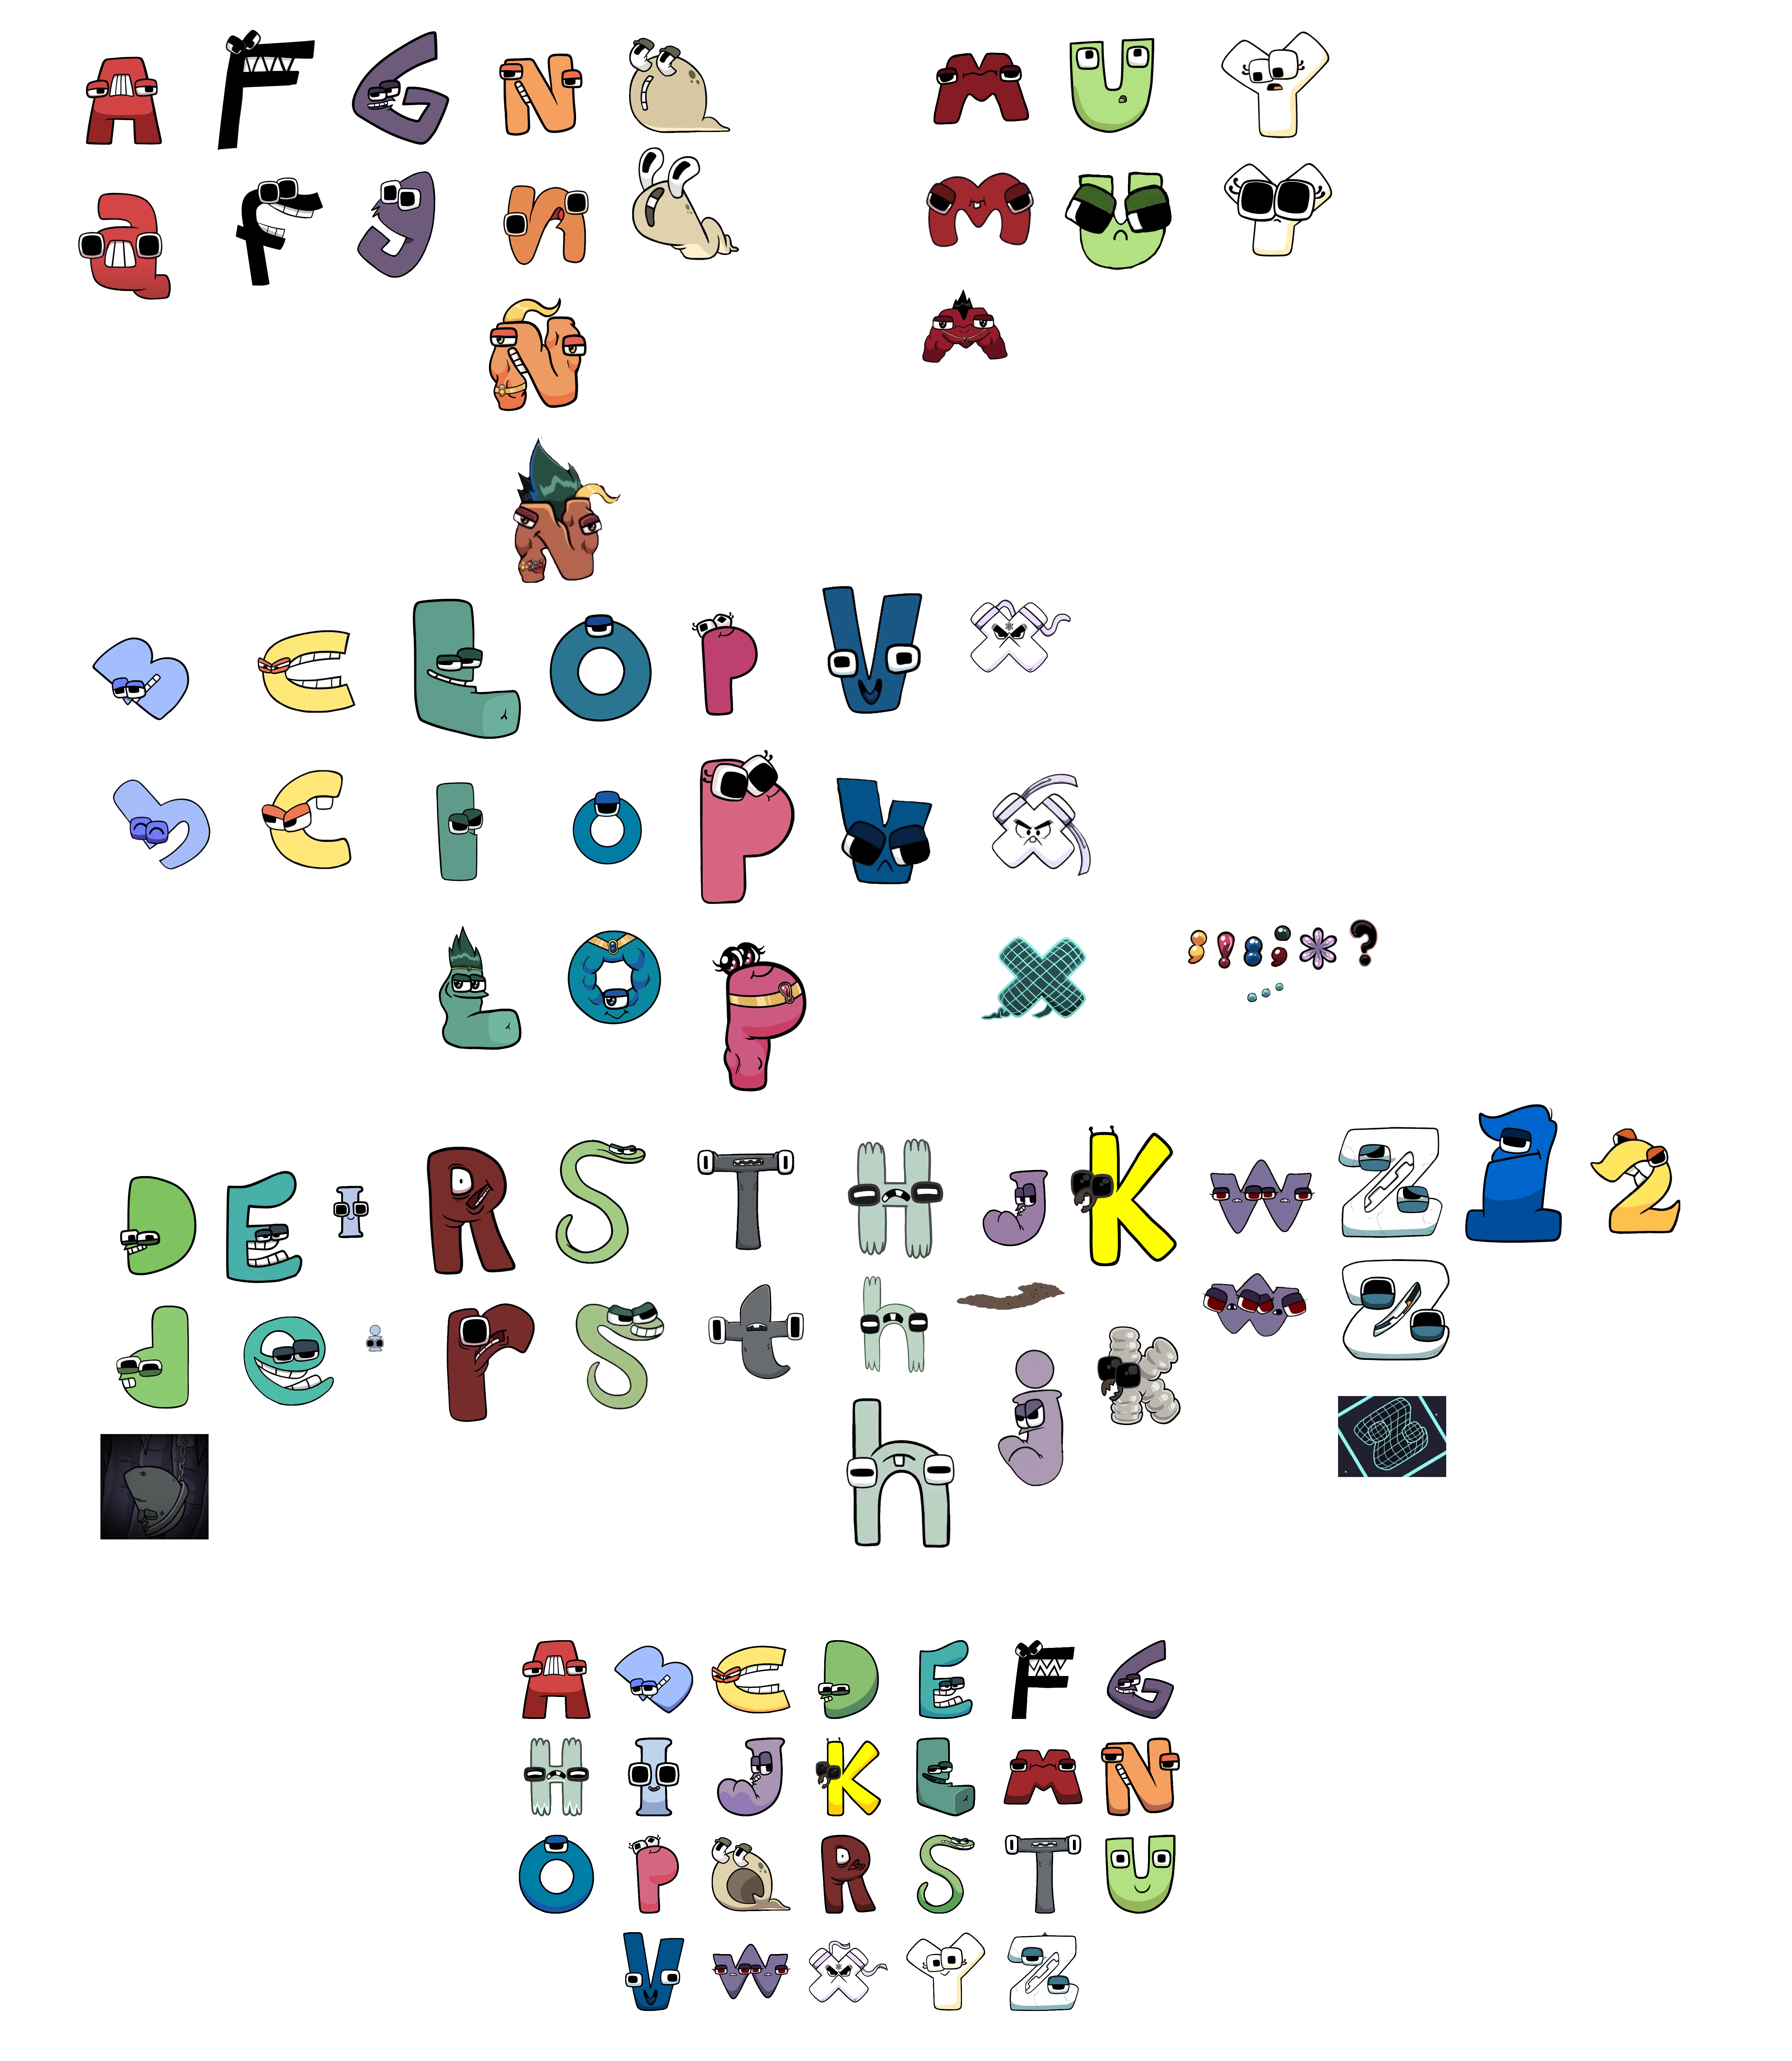 Fusions Alphabet Lore Letter Characters by Abbysek on DeviantArt